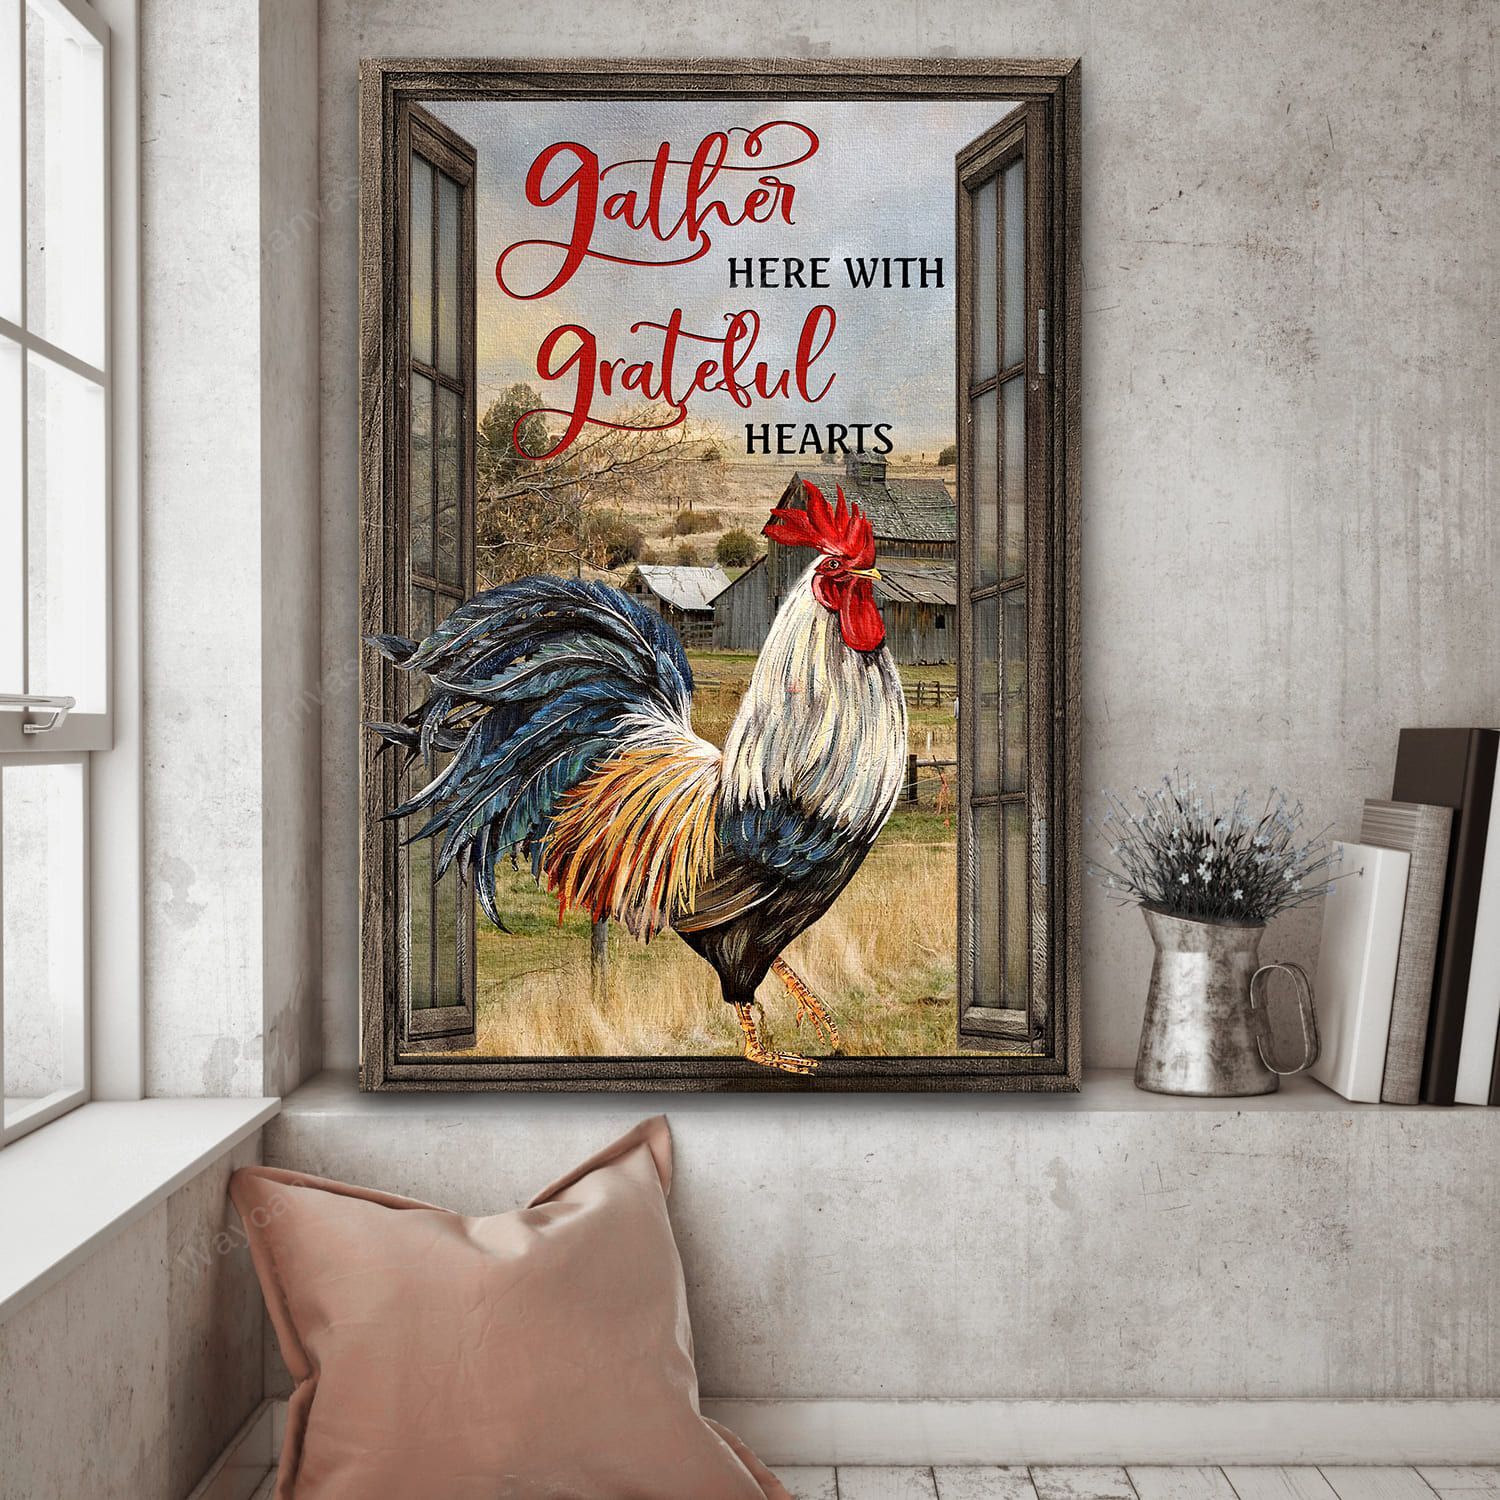 Big rooster chicken, Meadow land painting, Antique window, Gather here with grateful hearts - Jesus Portrait Canvas Prints, Wall Art